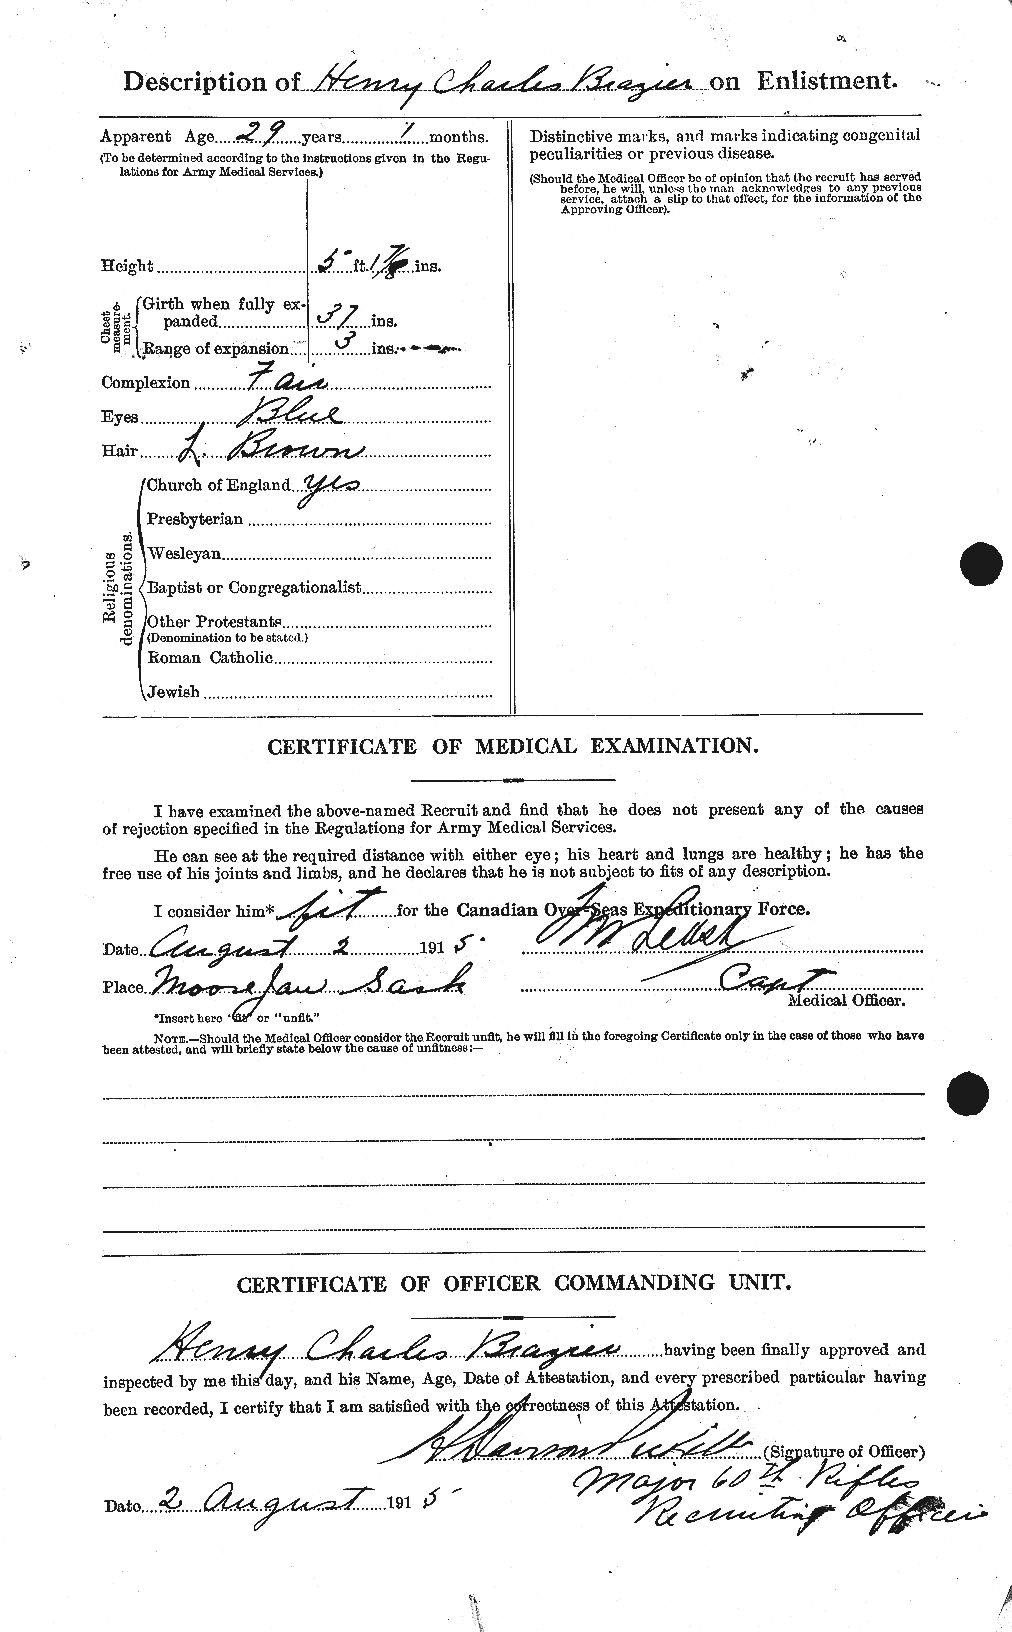 Personnel Records of the First World War - CEF 262483b